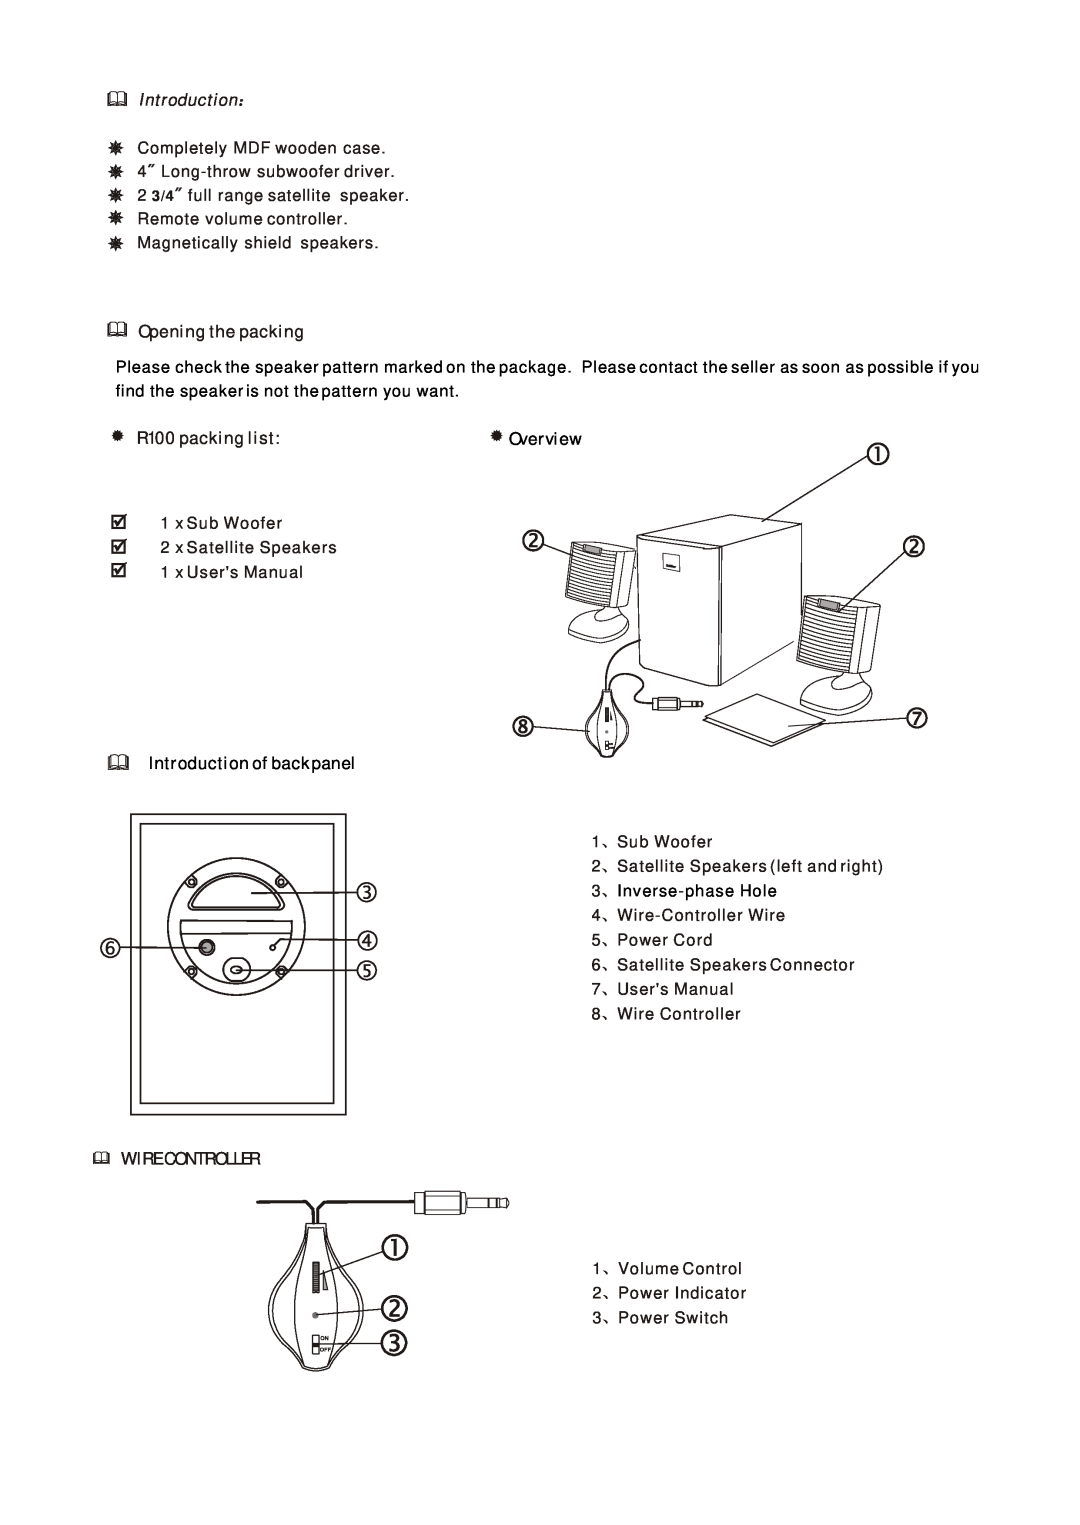 Edifier Enterprises Canada user manual Opening the packing, R100 packing list, Wire Controller, Introduction, Overview 